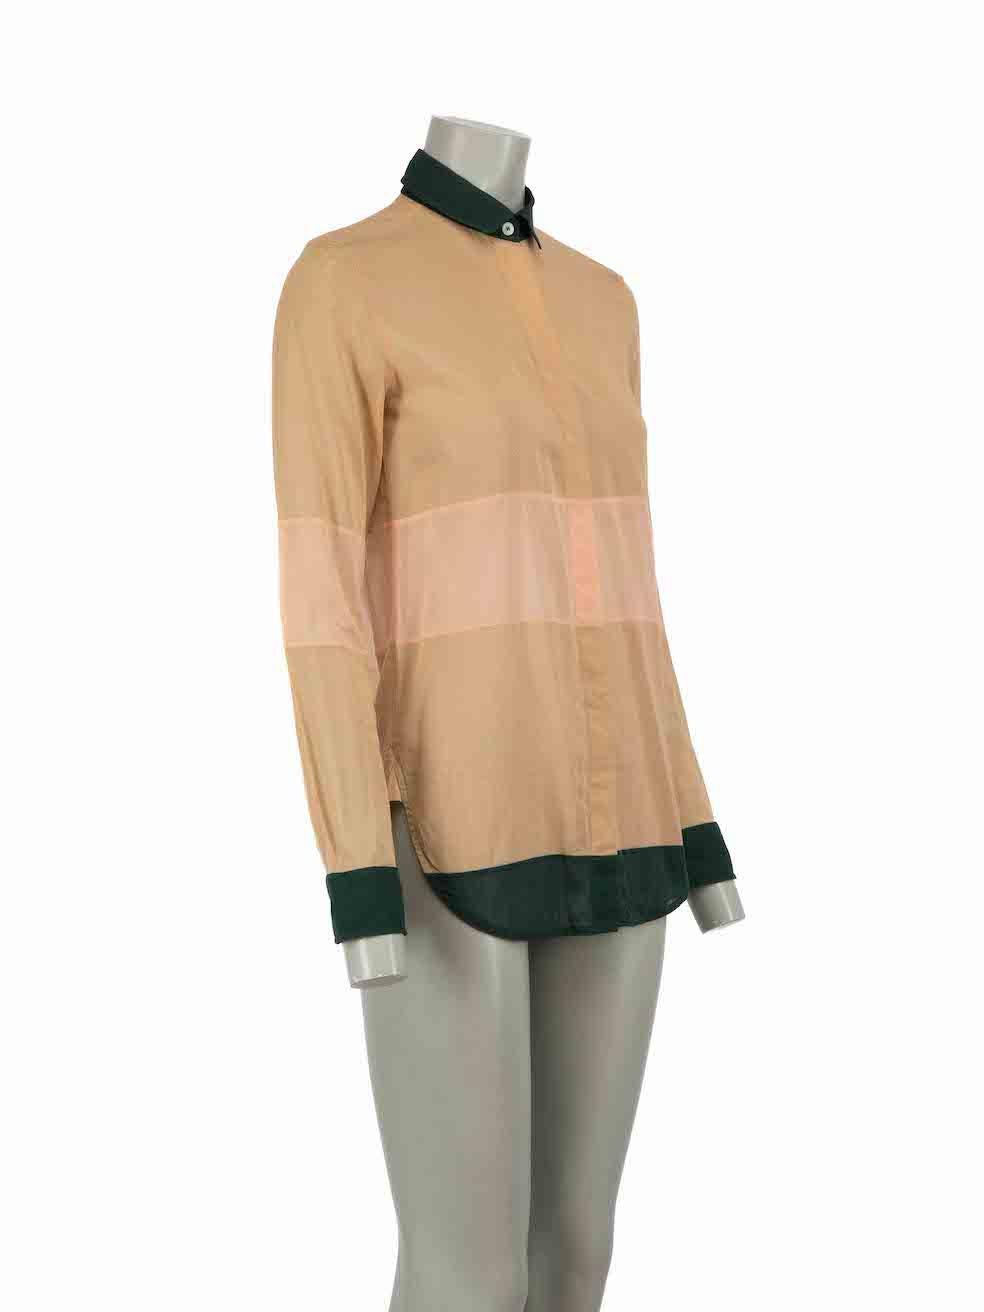 CONDITION is Good. Minor wear to shirt is evident. Light wear to fabric surface with one or two very small discoloured marks found through the front on this used Celine designer resale item.
 
Details
Beige
Cotton
Long sleeves blouse
Sheer
Colour